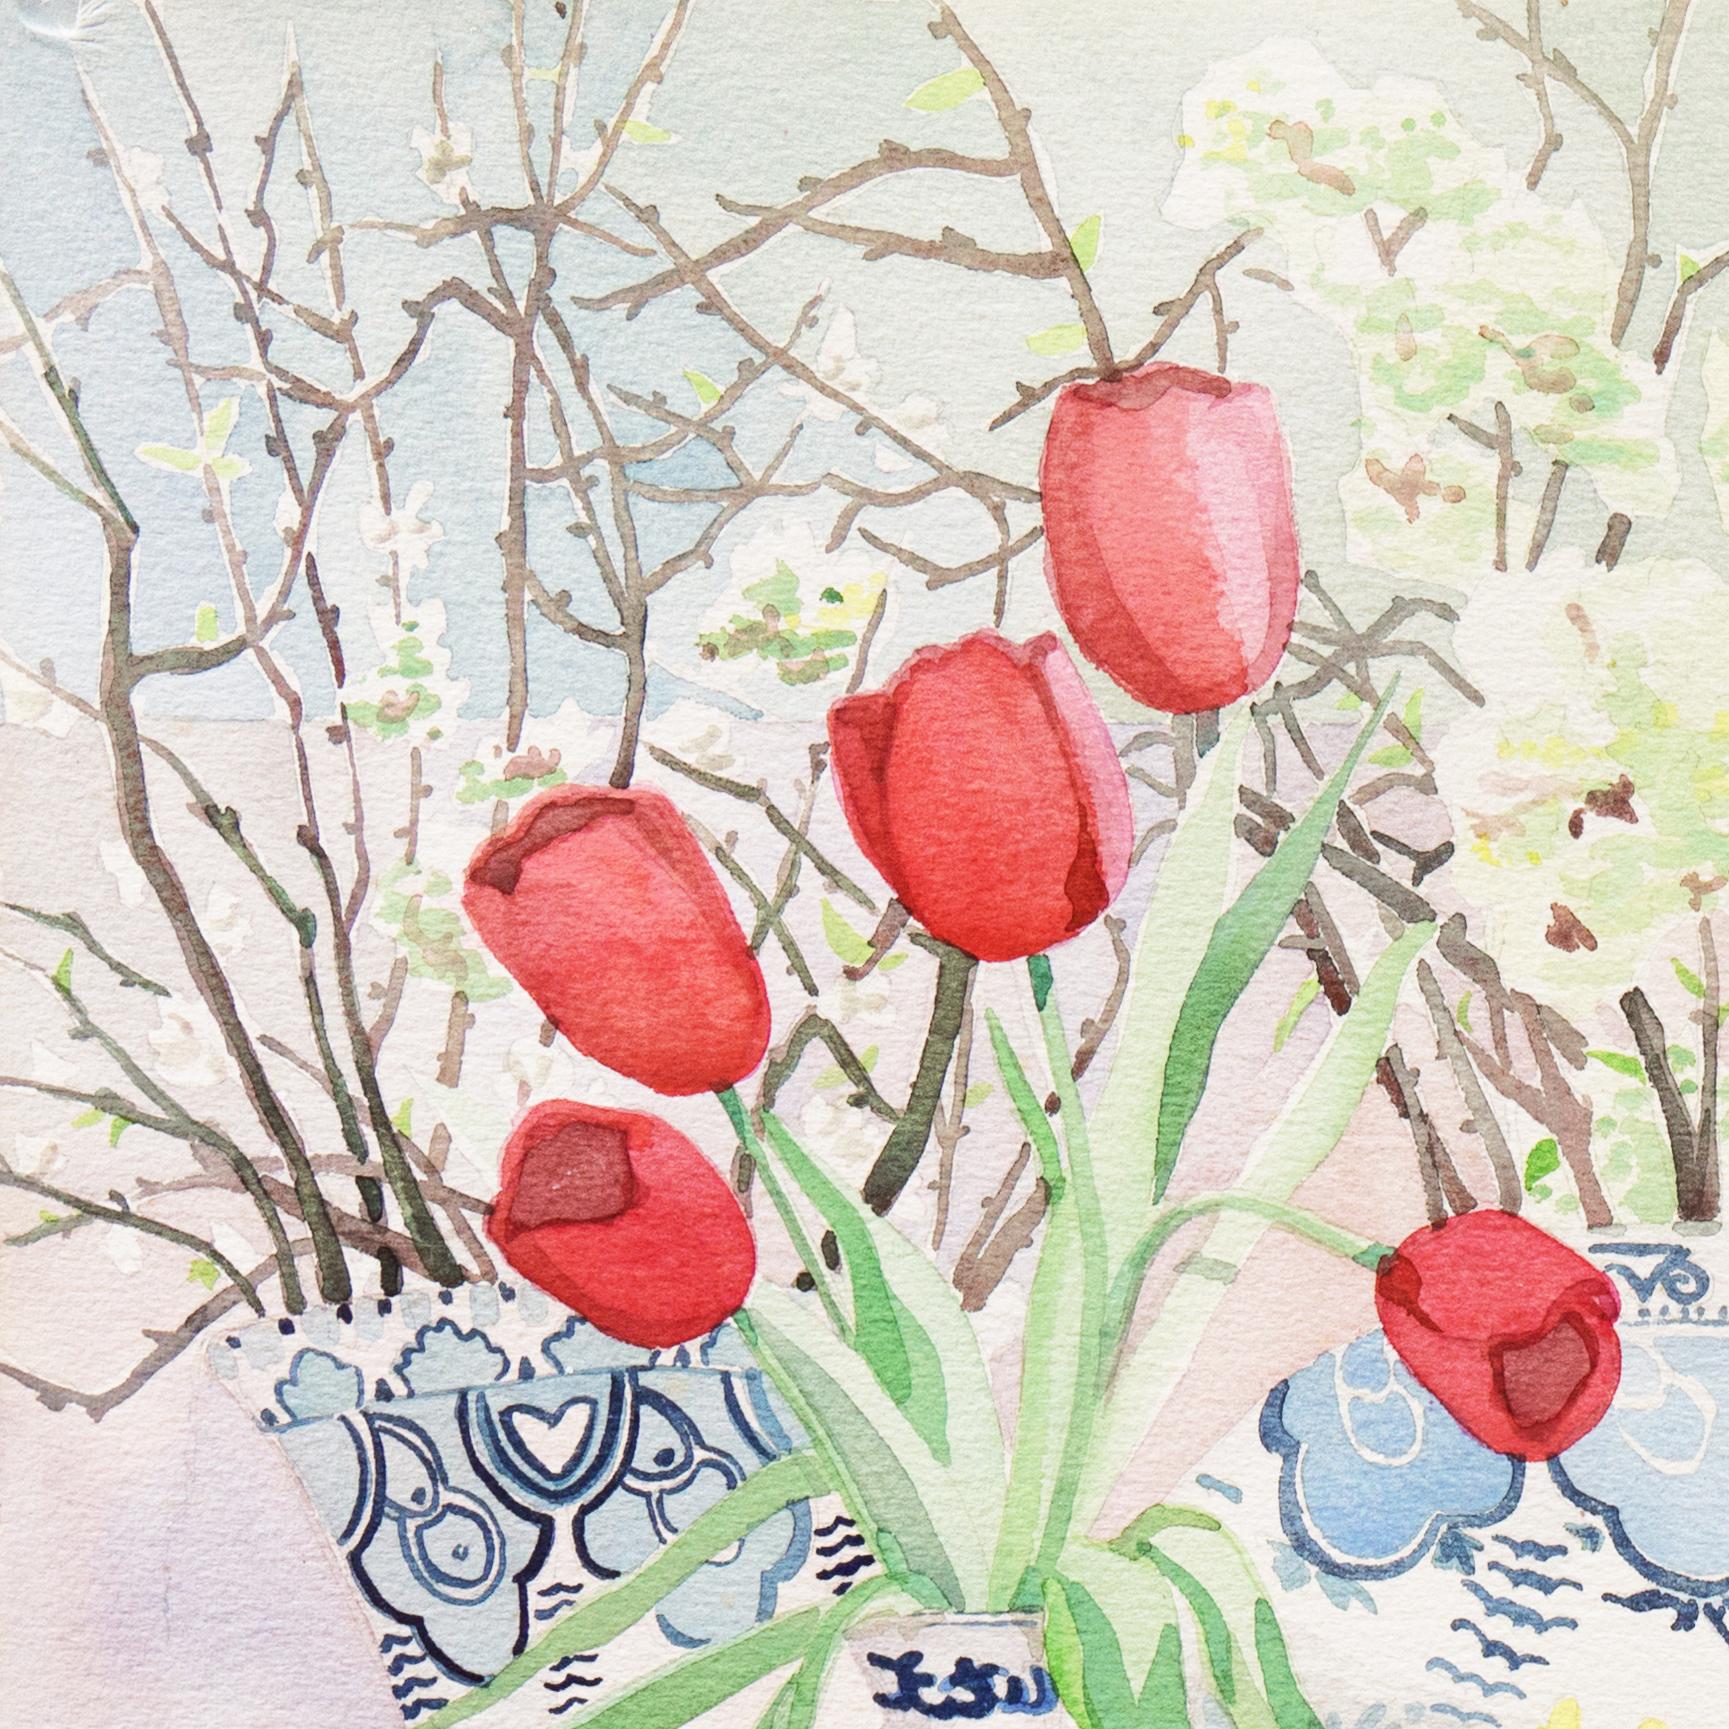 Red Tulips in Blue and White Porcelain  - Realist Art by Gregory Casillo